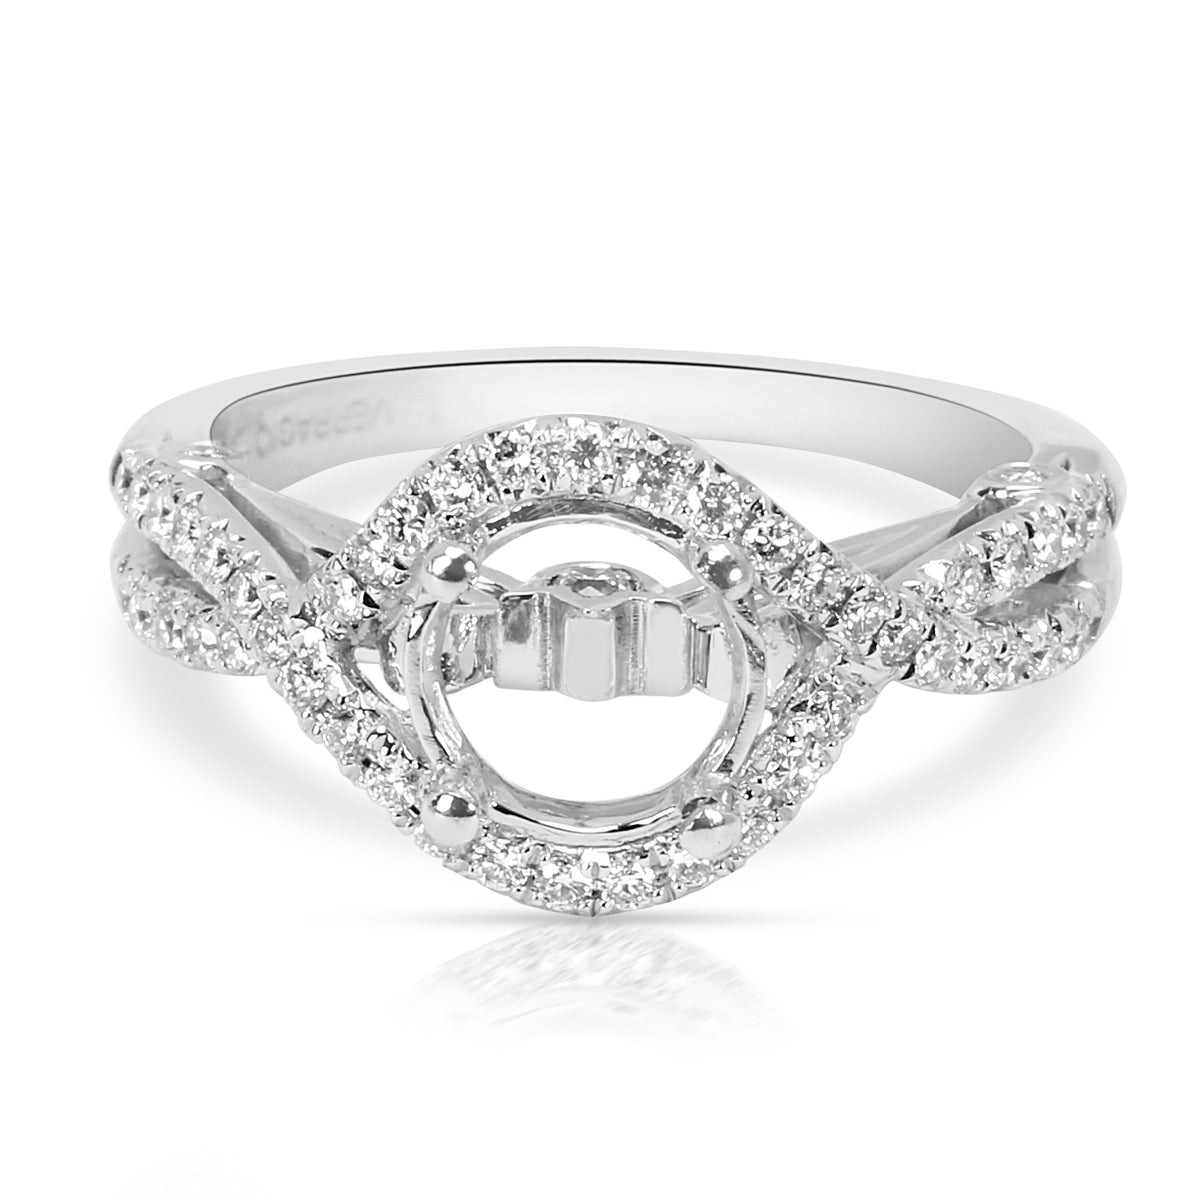 Verragio Couture Layered Braided Halo Diamond Engagement Ring Setting 0.30 ctw